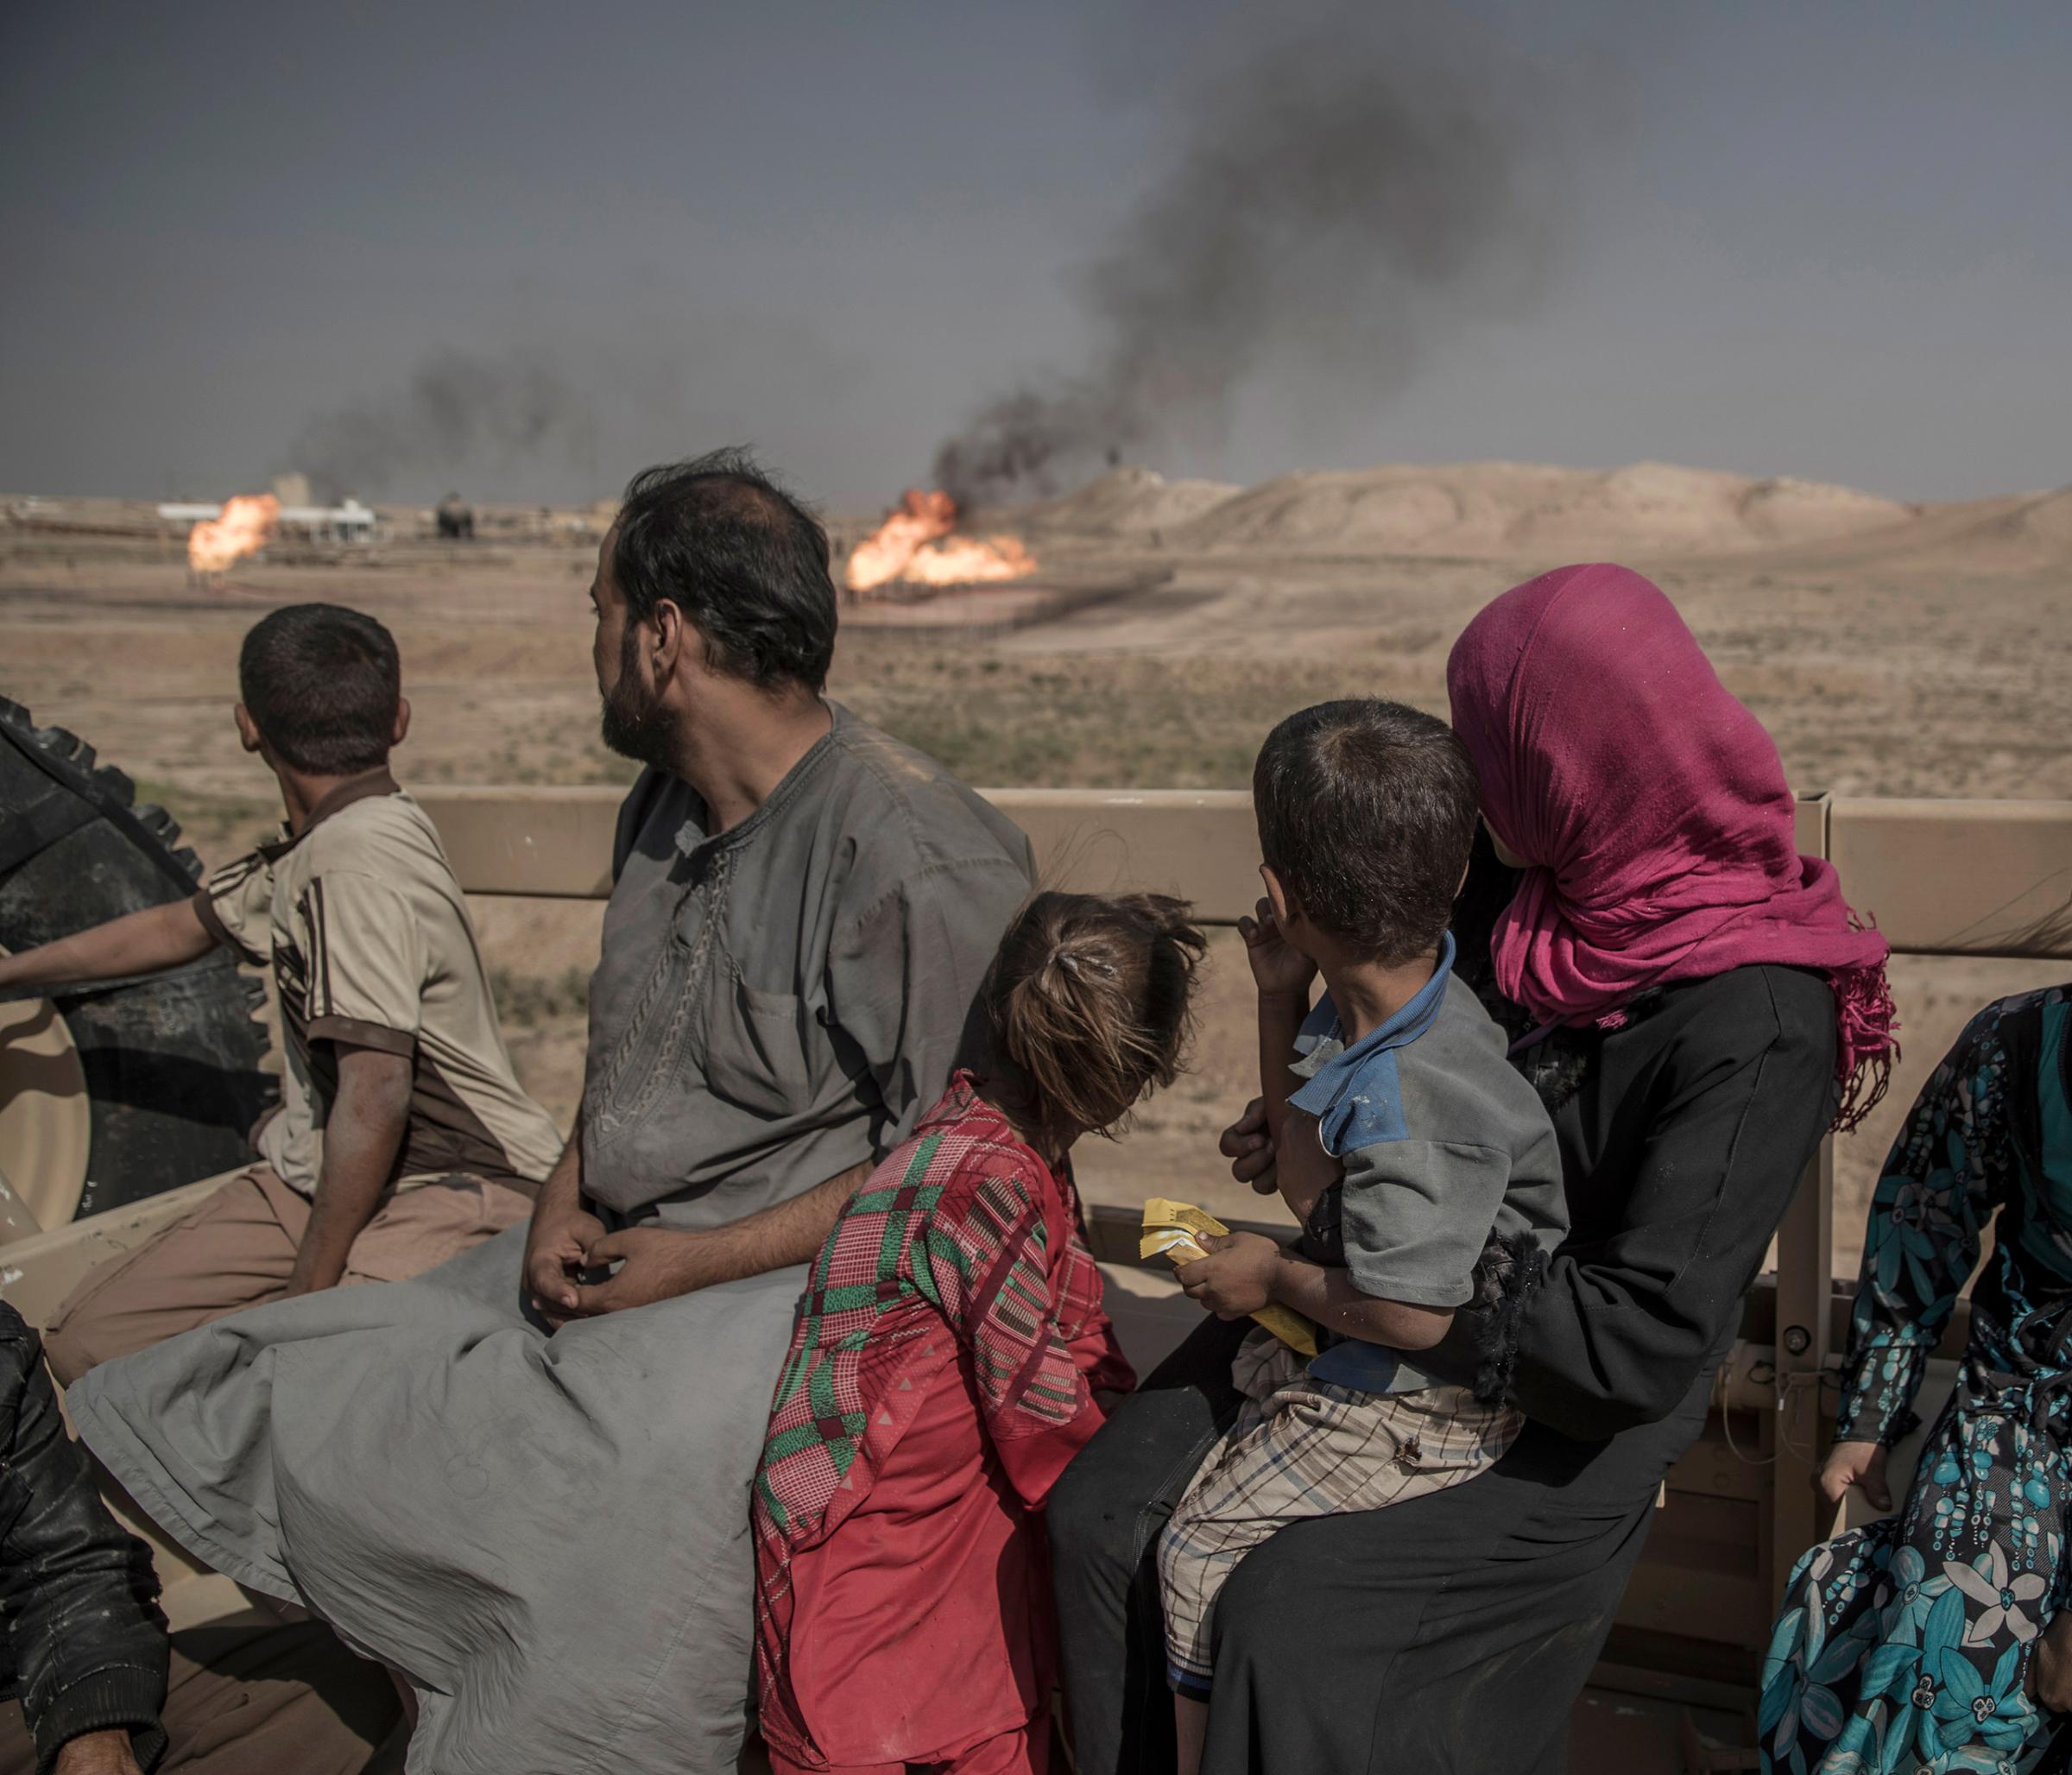 In the mountains outside Mosul, a group of twelve, including men, women and children who escaped from an IS-controlled village, have sought refuge with the Kurdish Peshmerga forces on the frontline in Kurdistan, Iraq, Sept. 2016